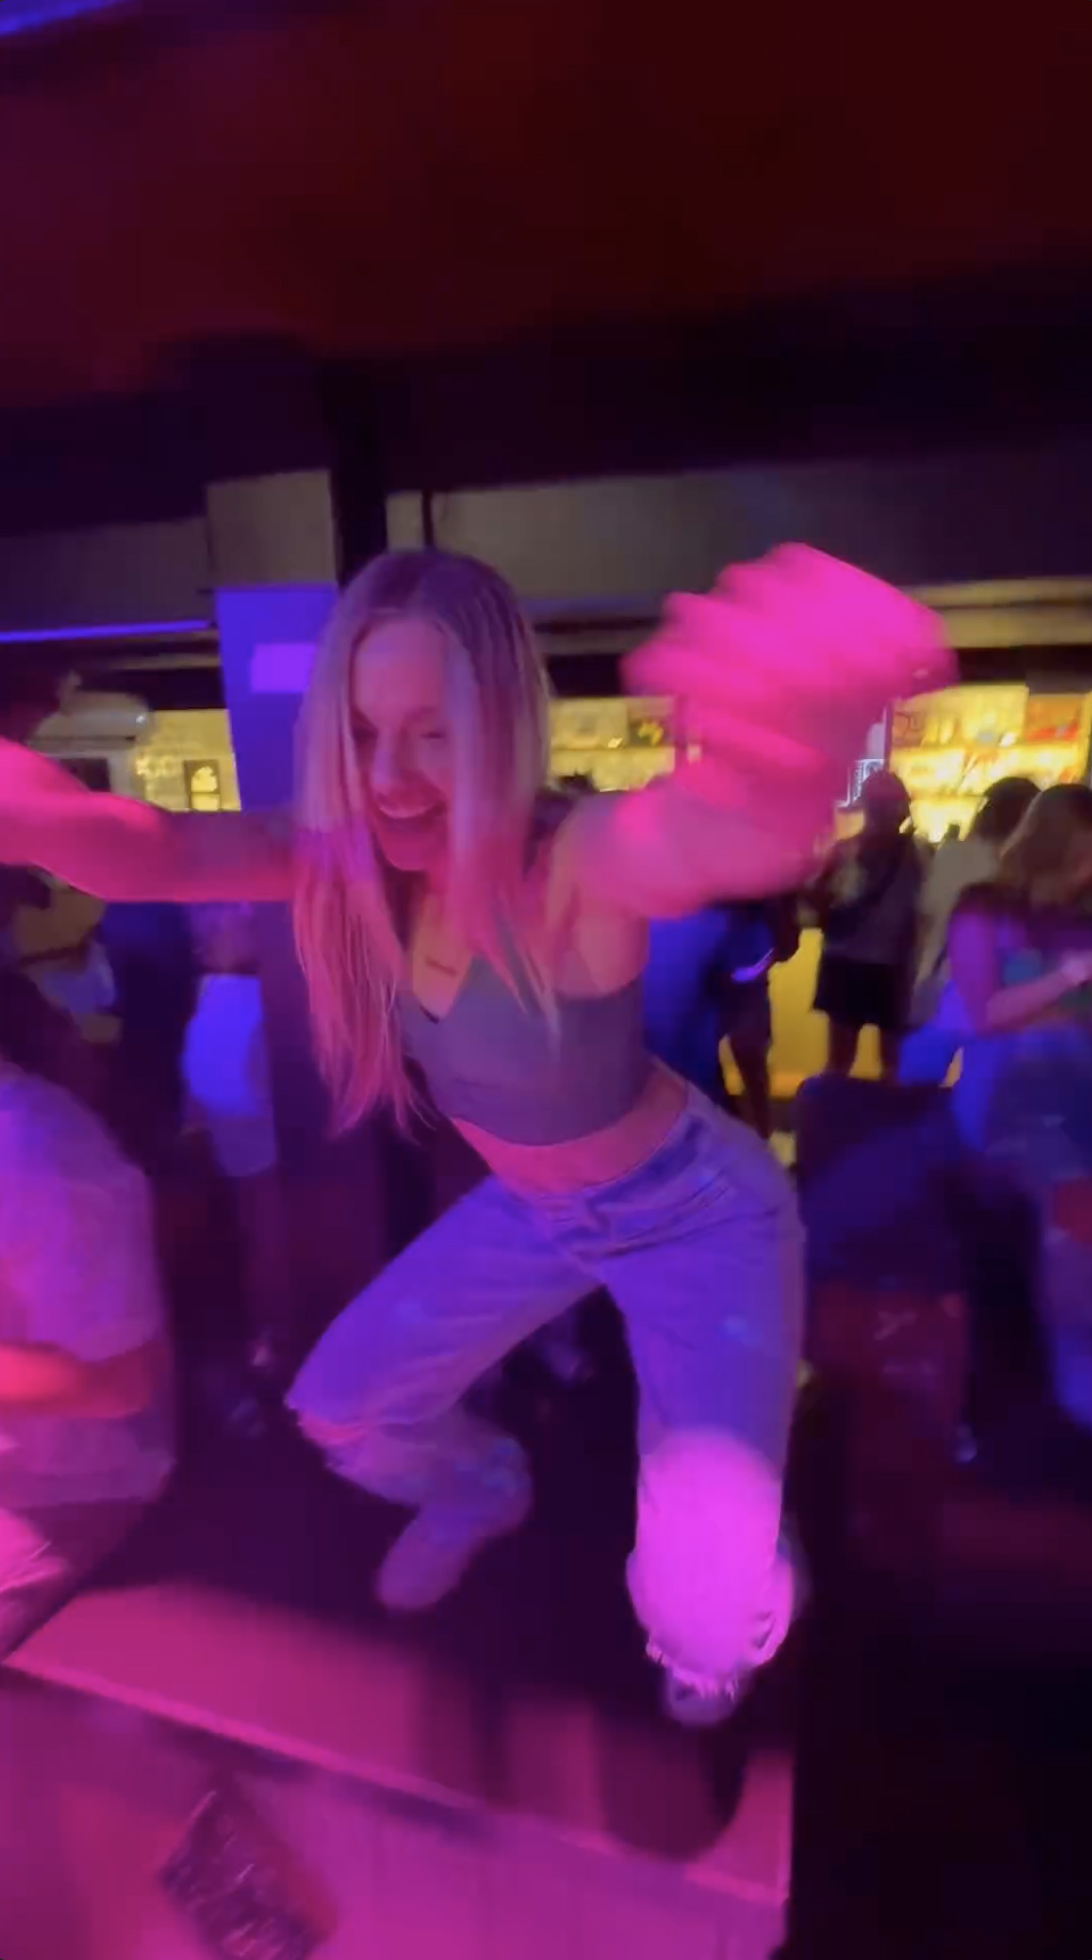 The MTV star waved her arms and showed off her gymnast athleticism as she dropped it low inside the crowded nightclub